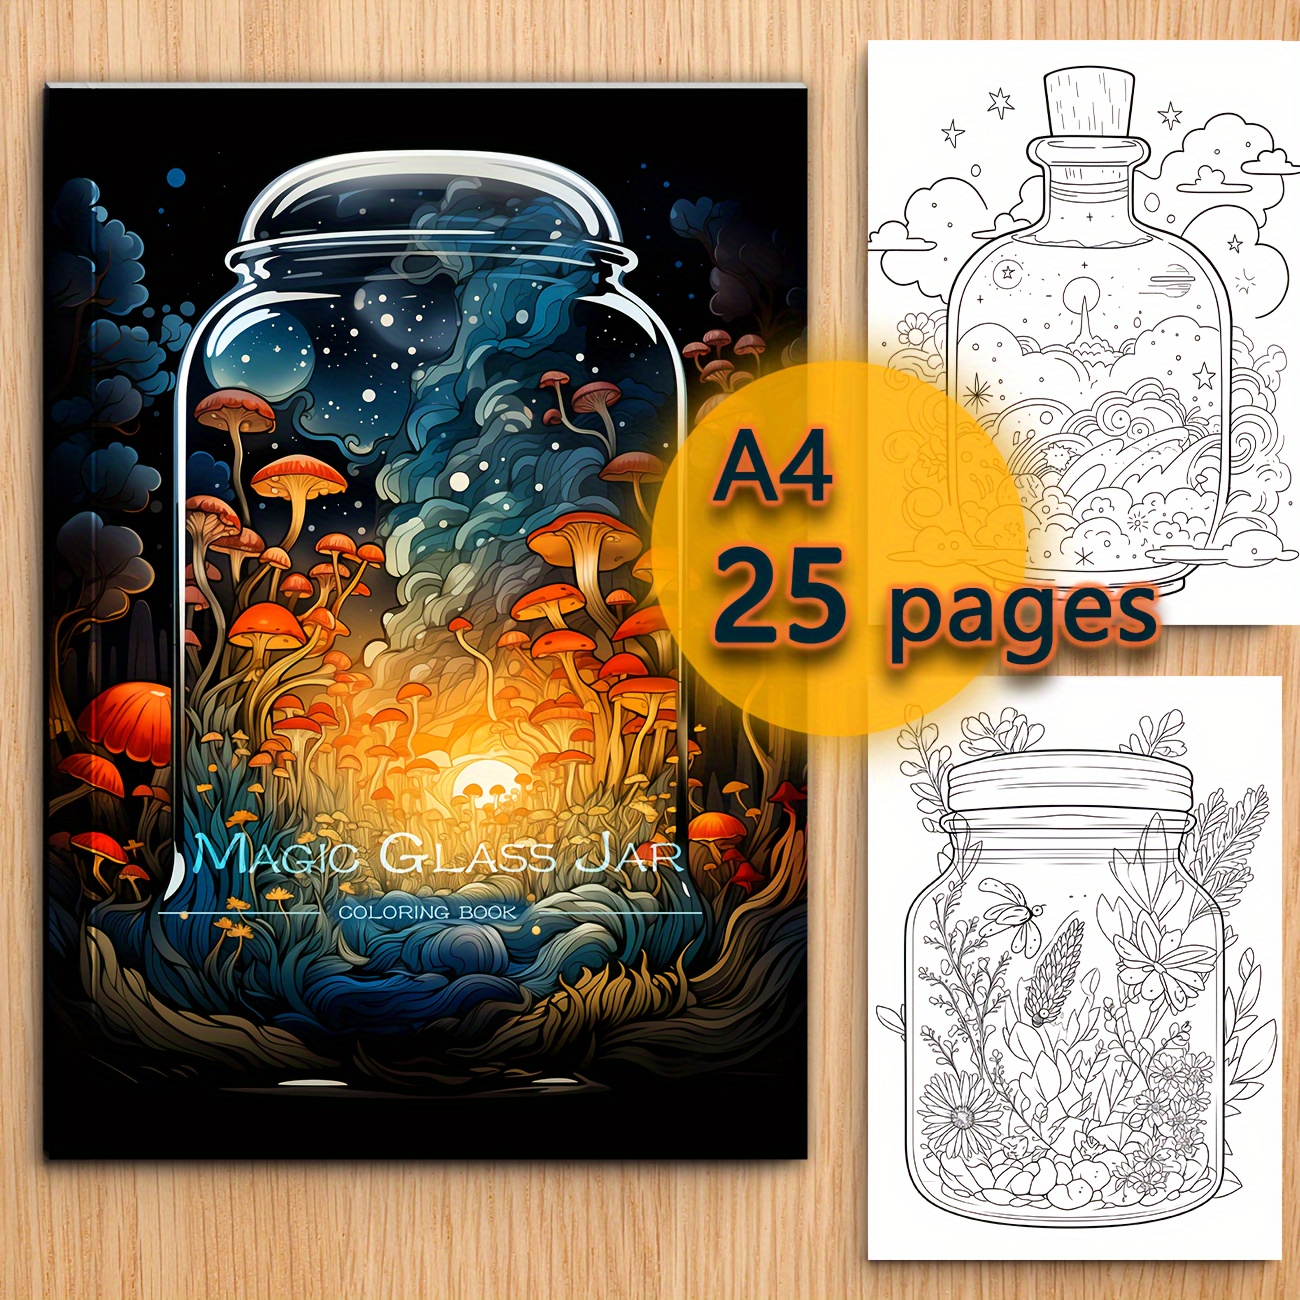 

1 Book Pf 25 Pages Coloring Book Magic Glass Jar Patterns, Original A4 Paper Soothing Stress Coloring Book New Year Thanksgiving Christmas Festival Party Gift